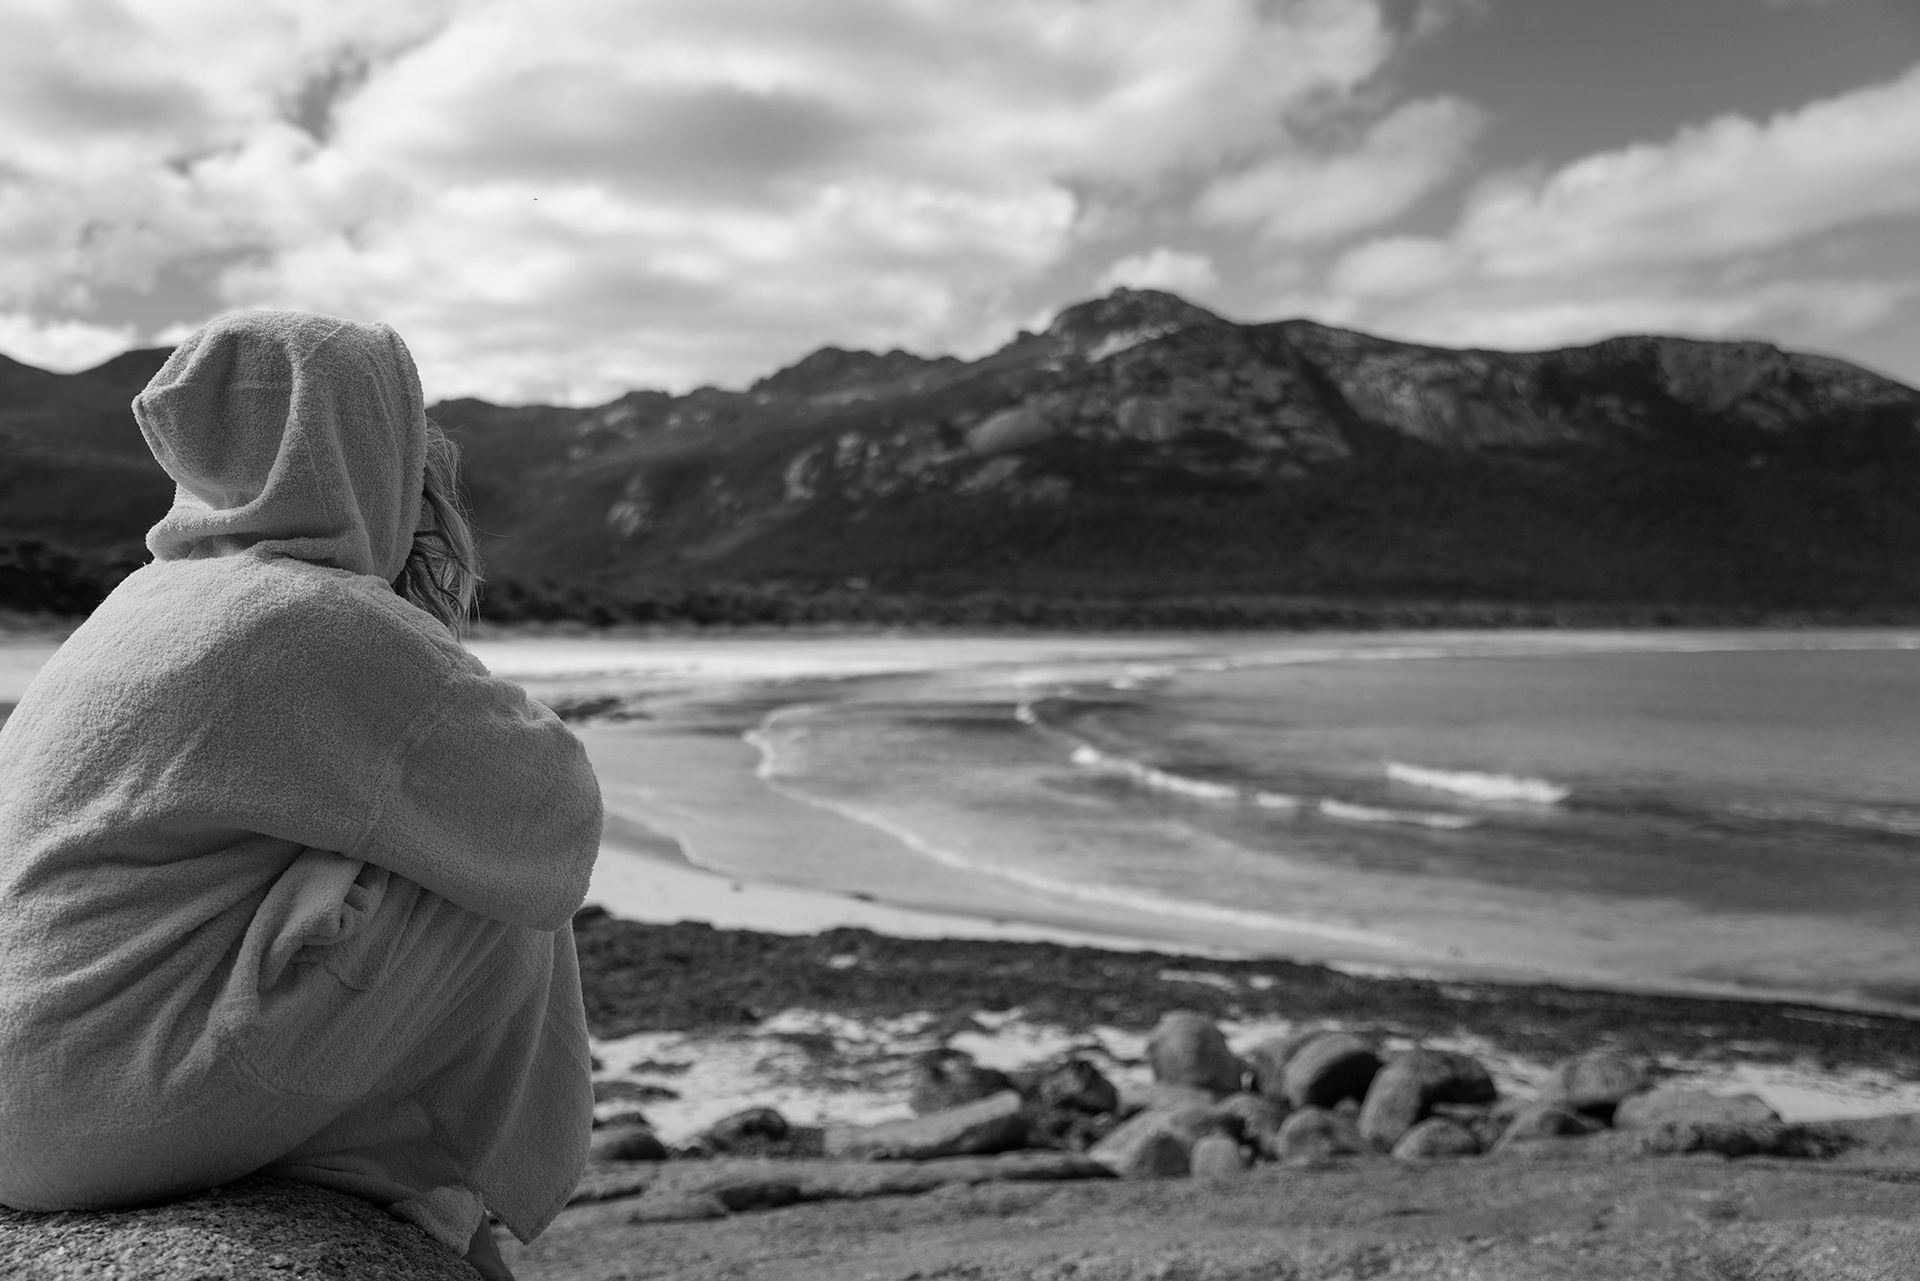 A black and white photo of a person sitting on a rock looking at the ocean, wrapped up in hoodie towel.